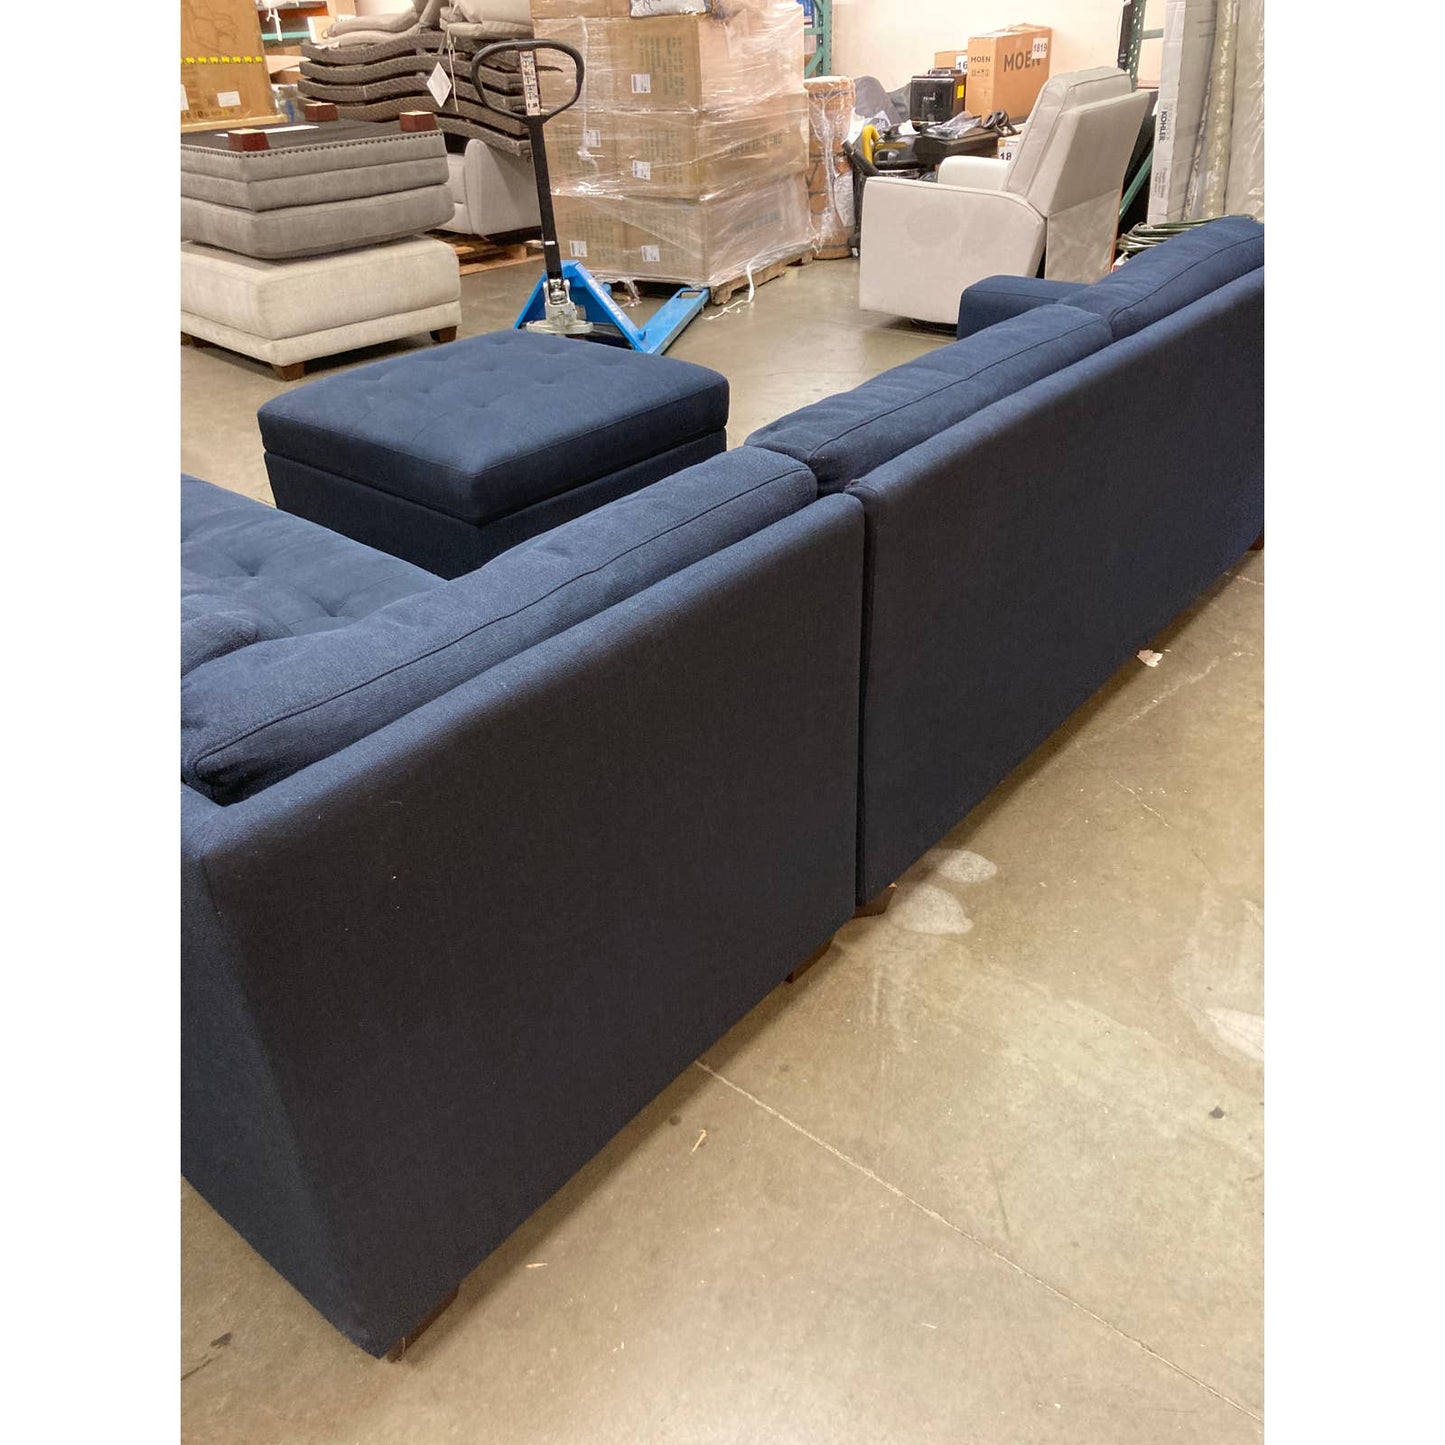 Costco - Thomasville Miles Fabric Sectional with Storage Ottoman - Retail $1799